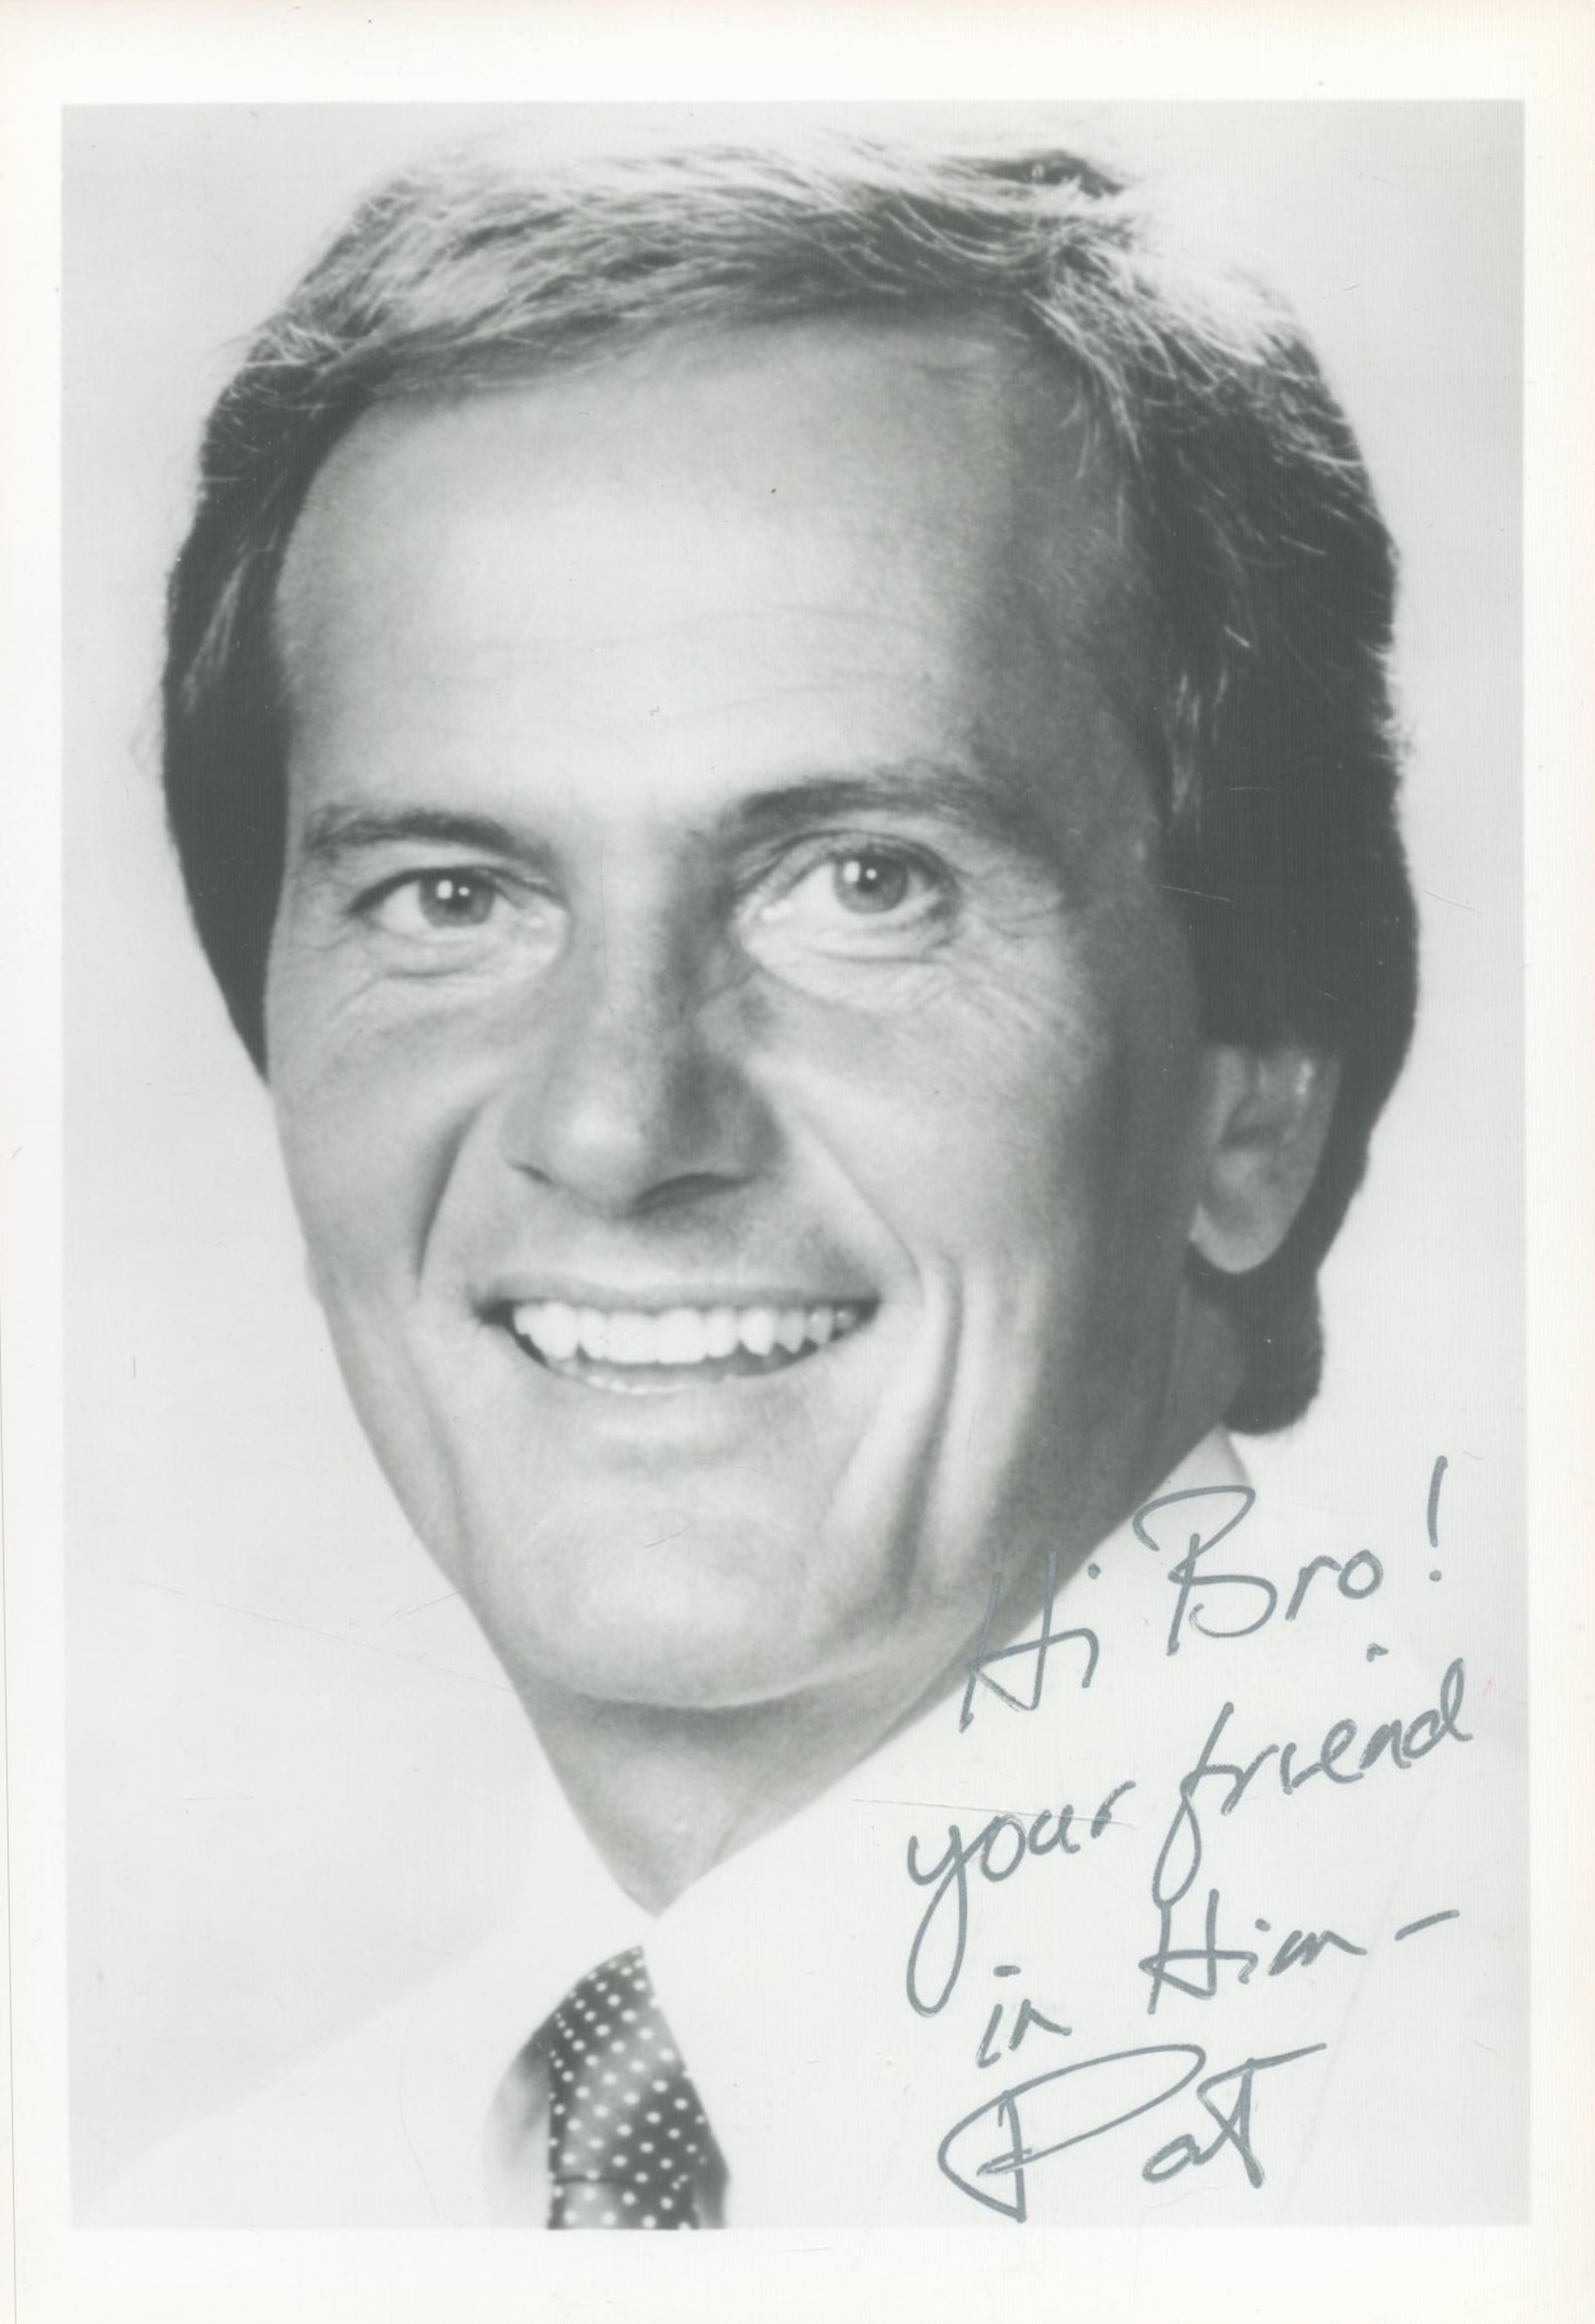 Pat Boone signed 7x5 black and white photo. Boone is an American singer and actor. He was a